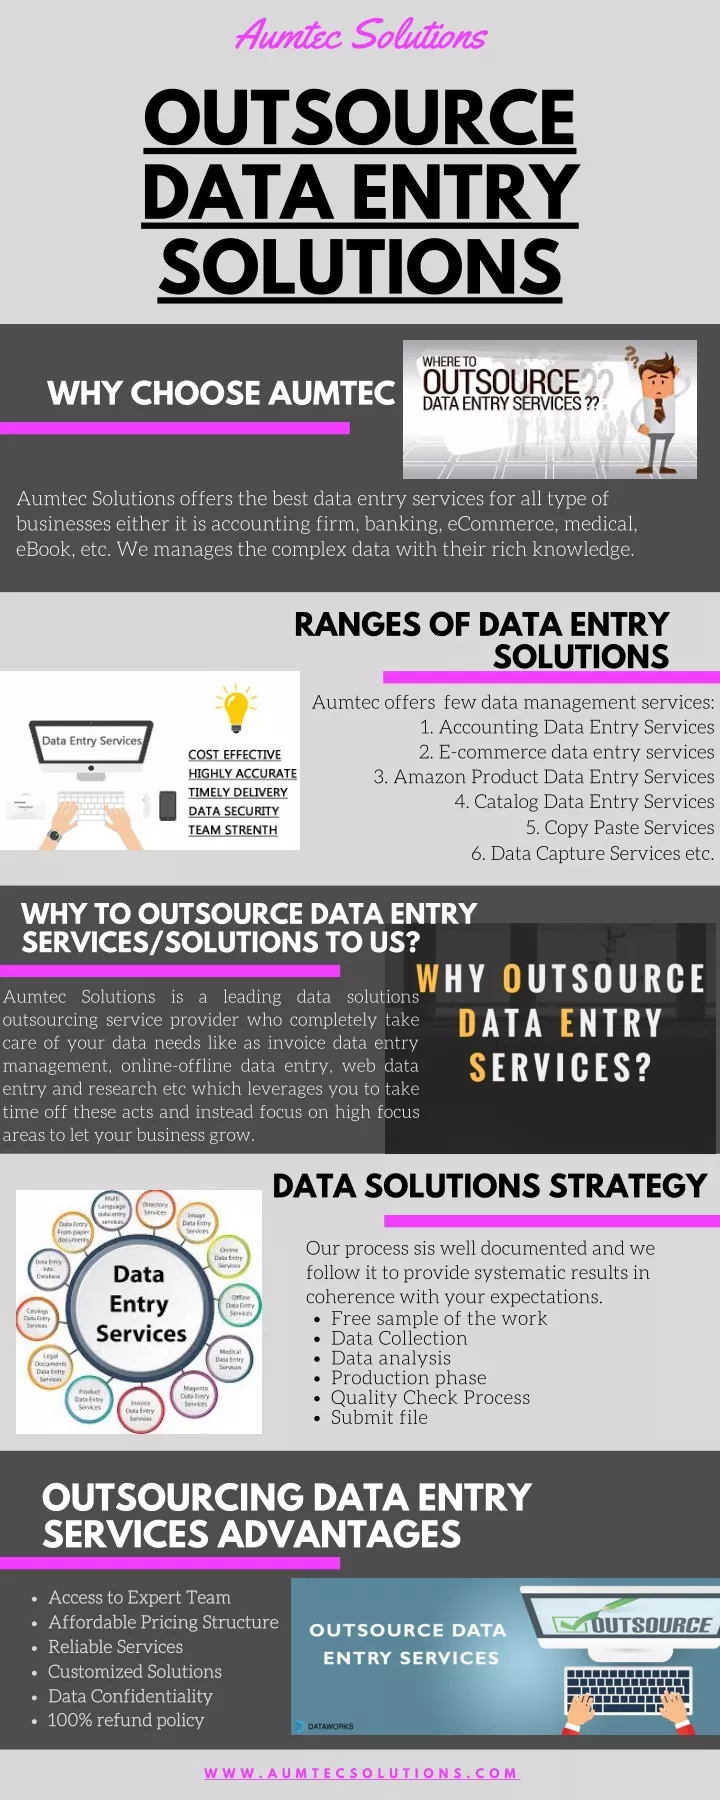 aumtec solutions outsource data entry solutions